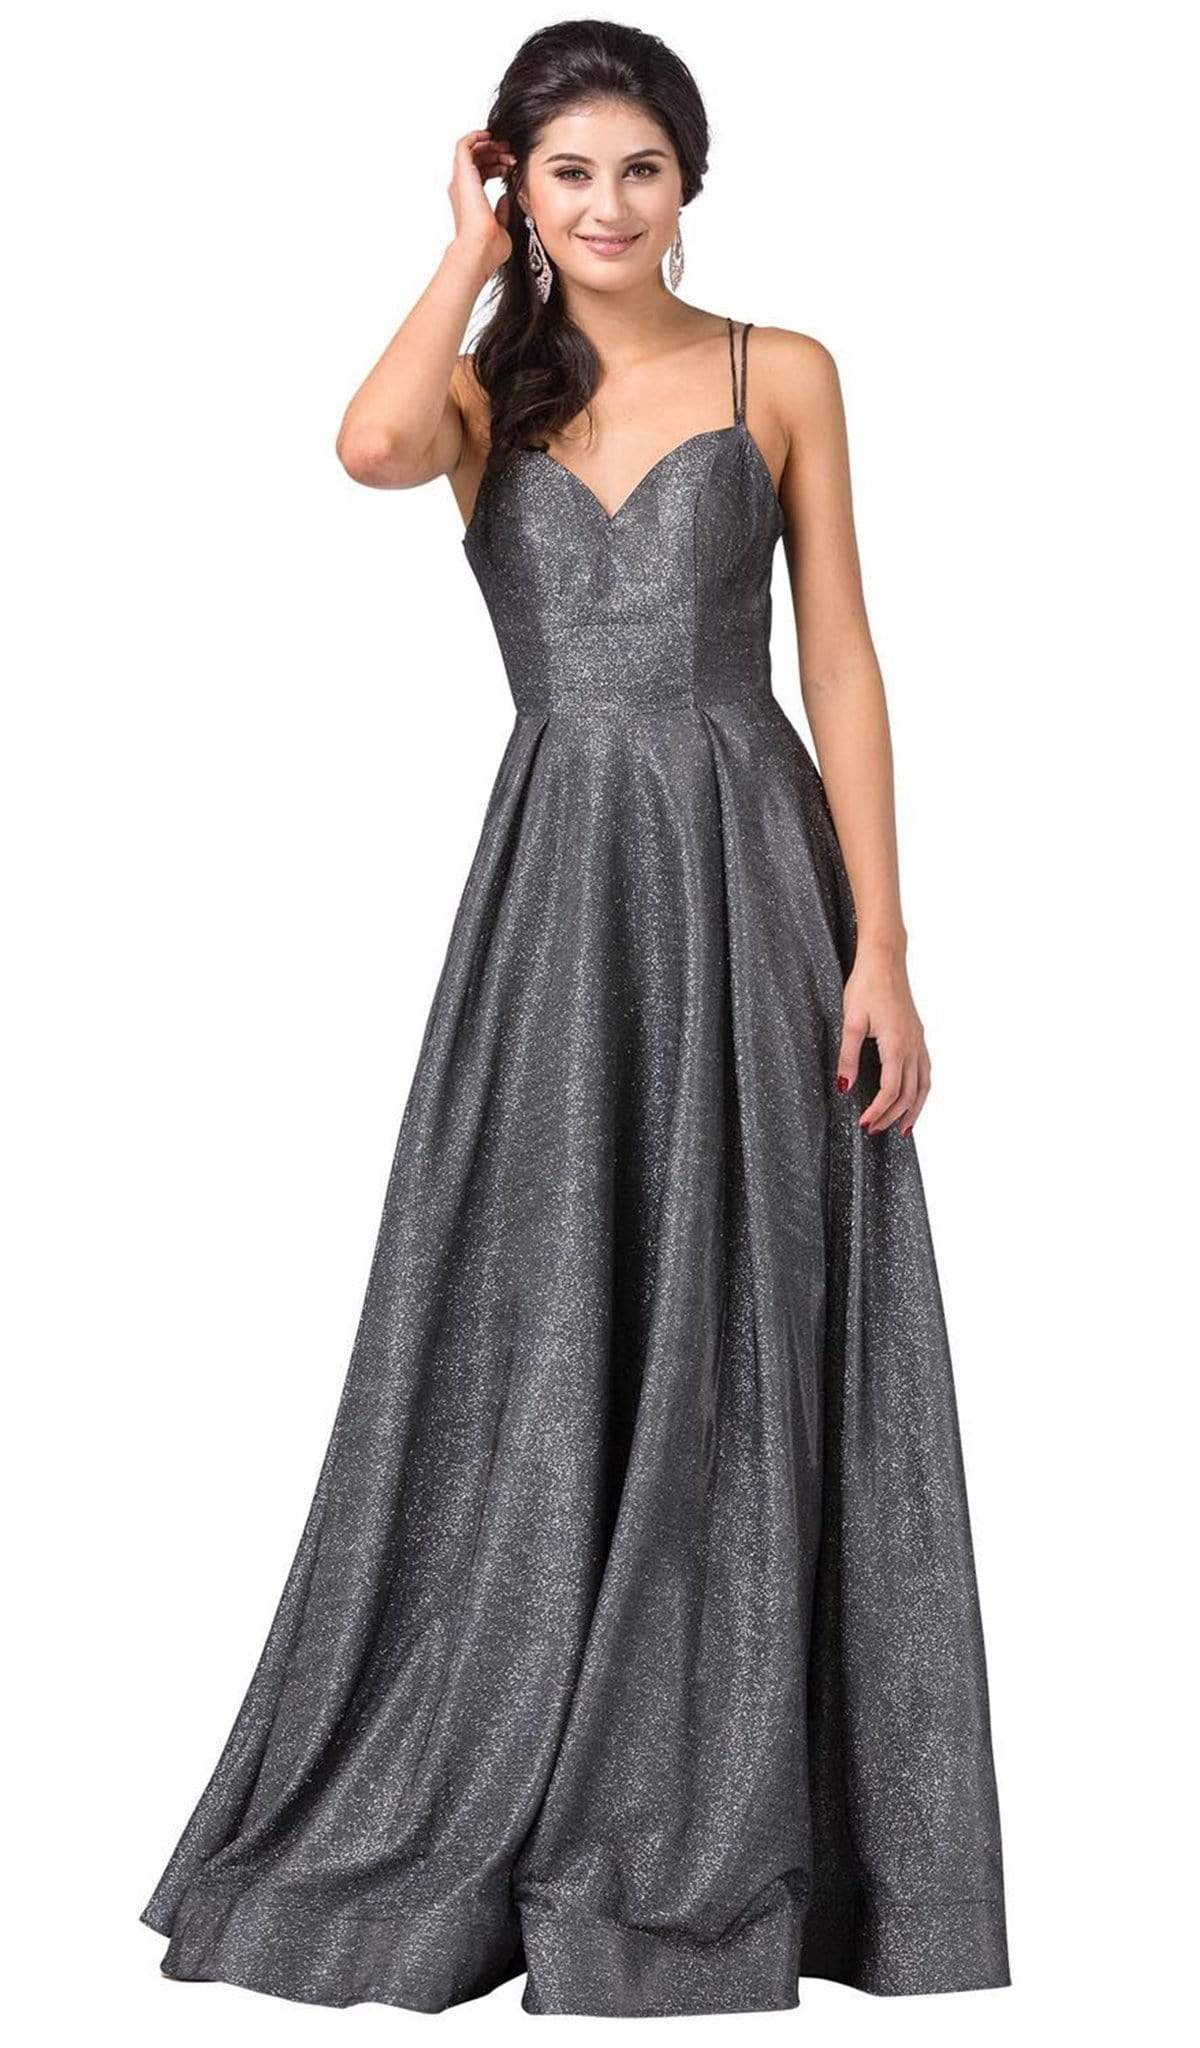 Dancing Queen - 2611 Sweetheart Lace Up Back Metallic Jersey Gown Special Occasion Dress XS / Dark Charcoal